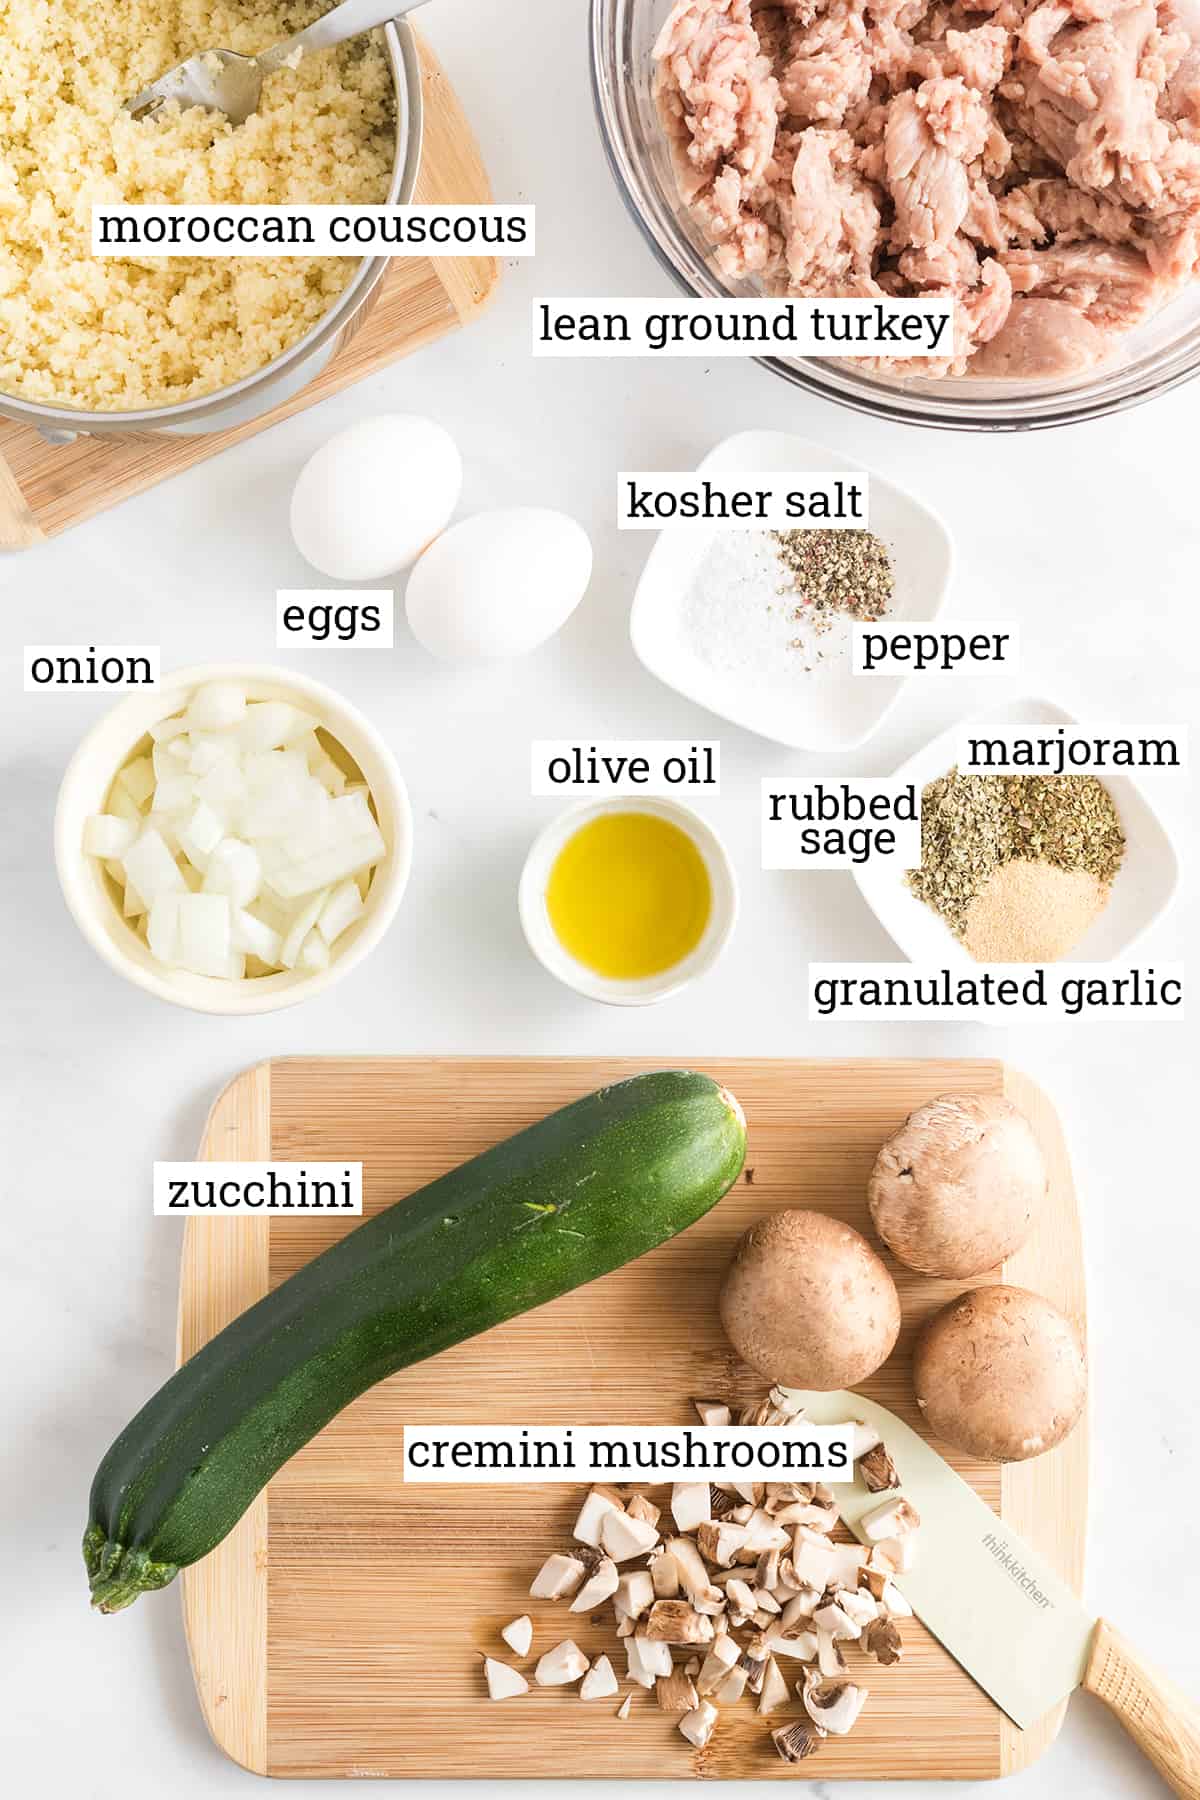 All the ingredients needed to make Turkey Couscous Meatloaf